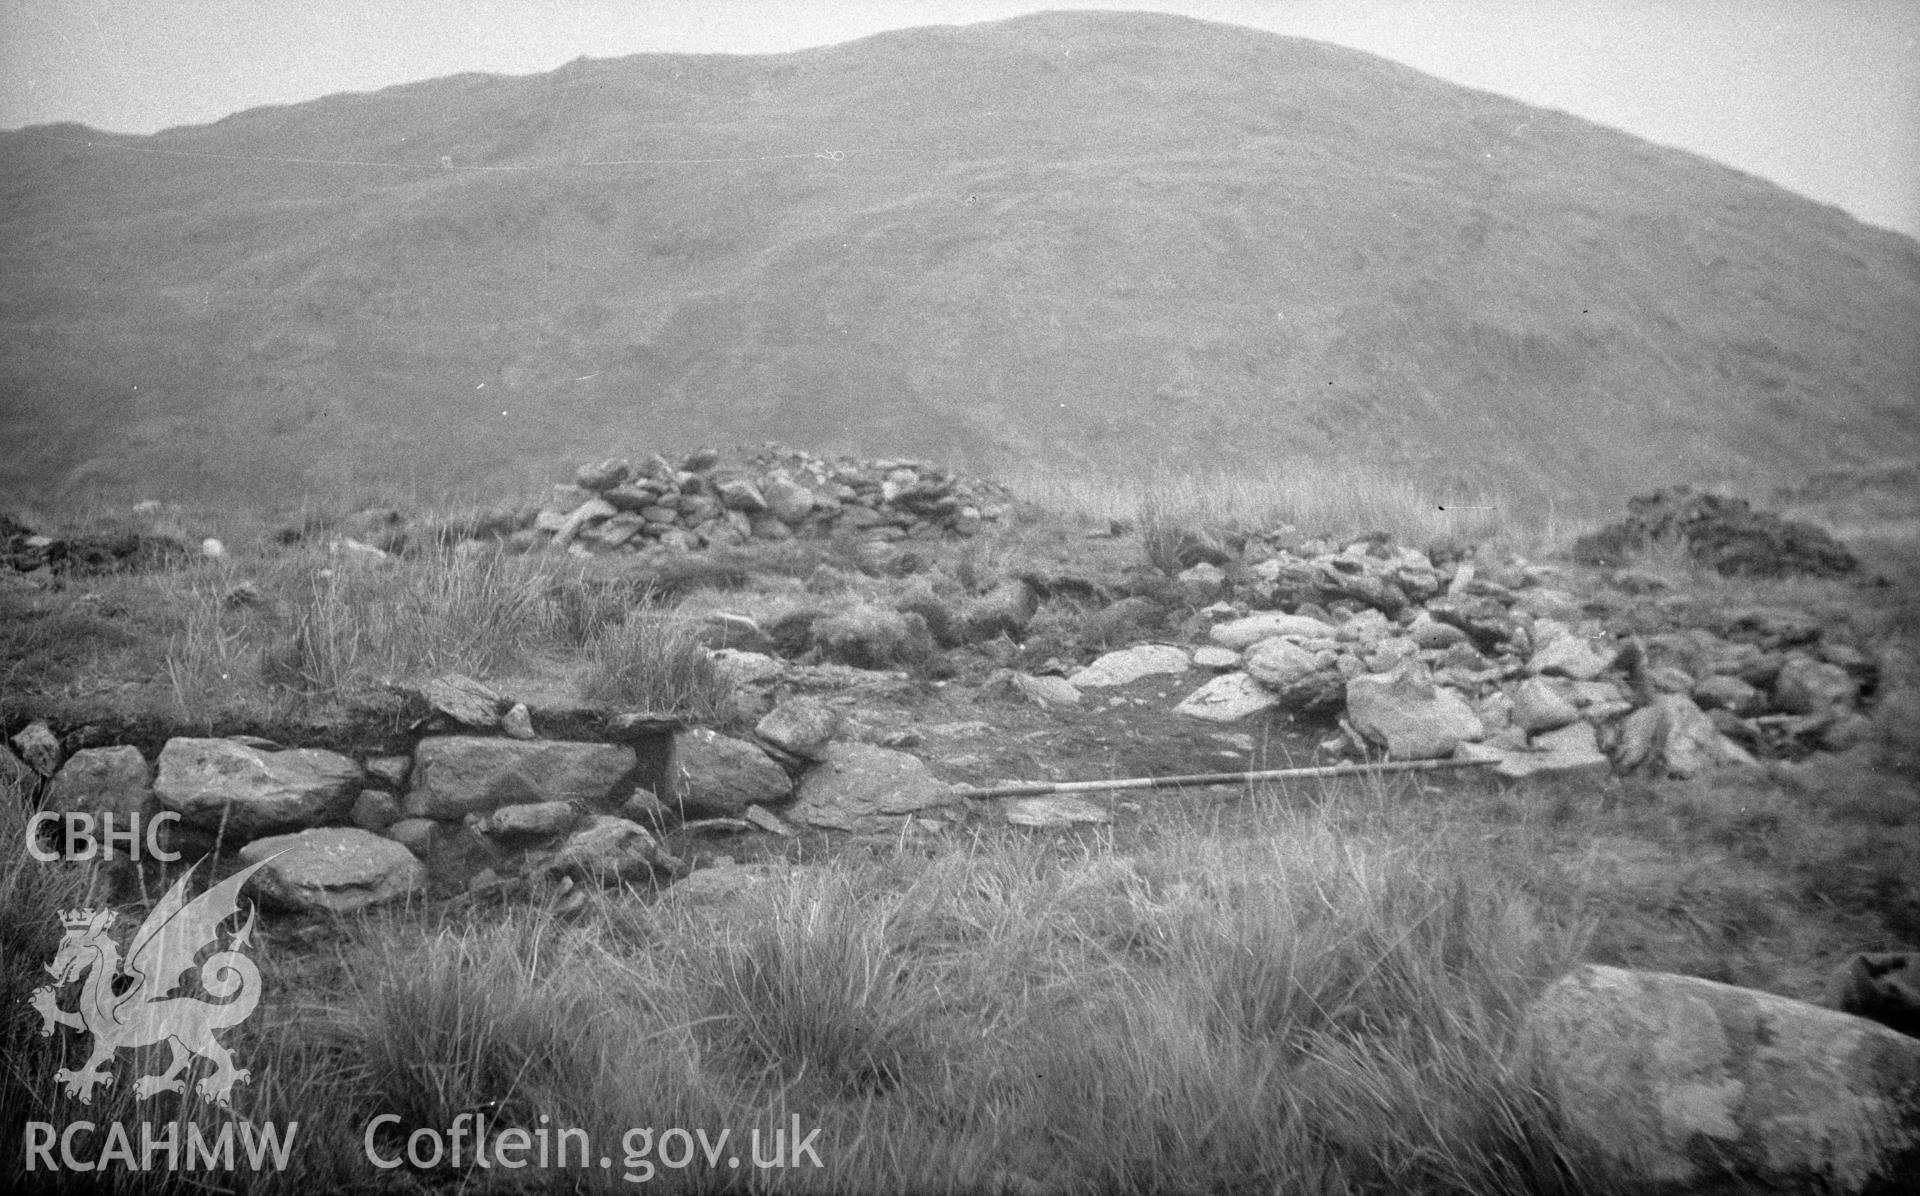 Digital copy of a black and white nitrate negative showing view of the remains of a stove site in a field, unknown location.